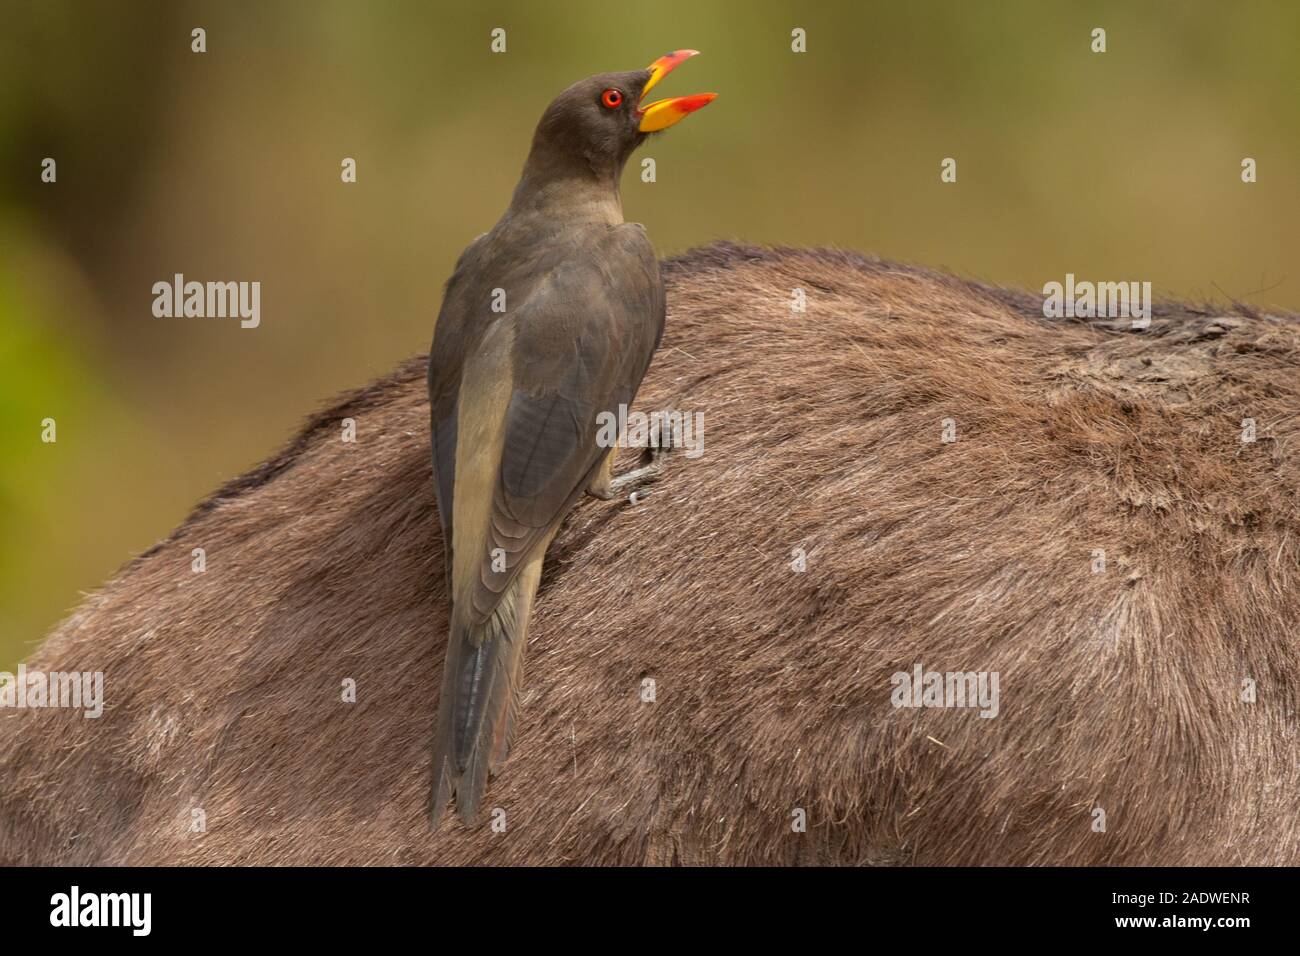 Yellow billed Oxpecker, Buphagus africanus, The Gambia, West Africa Stock Photo